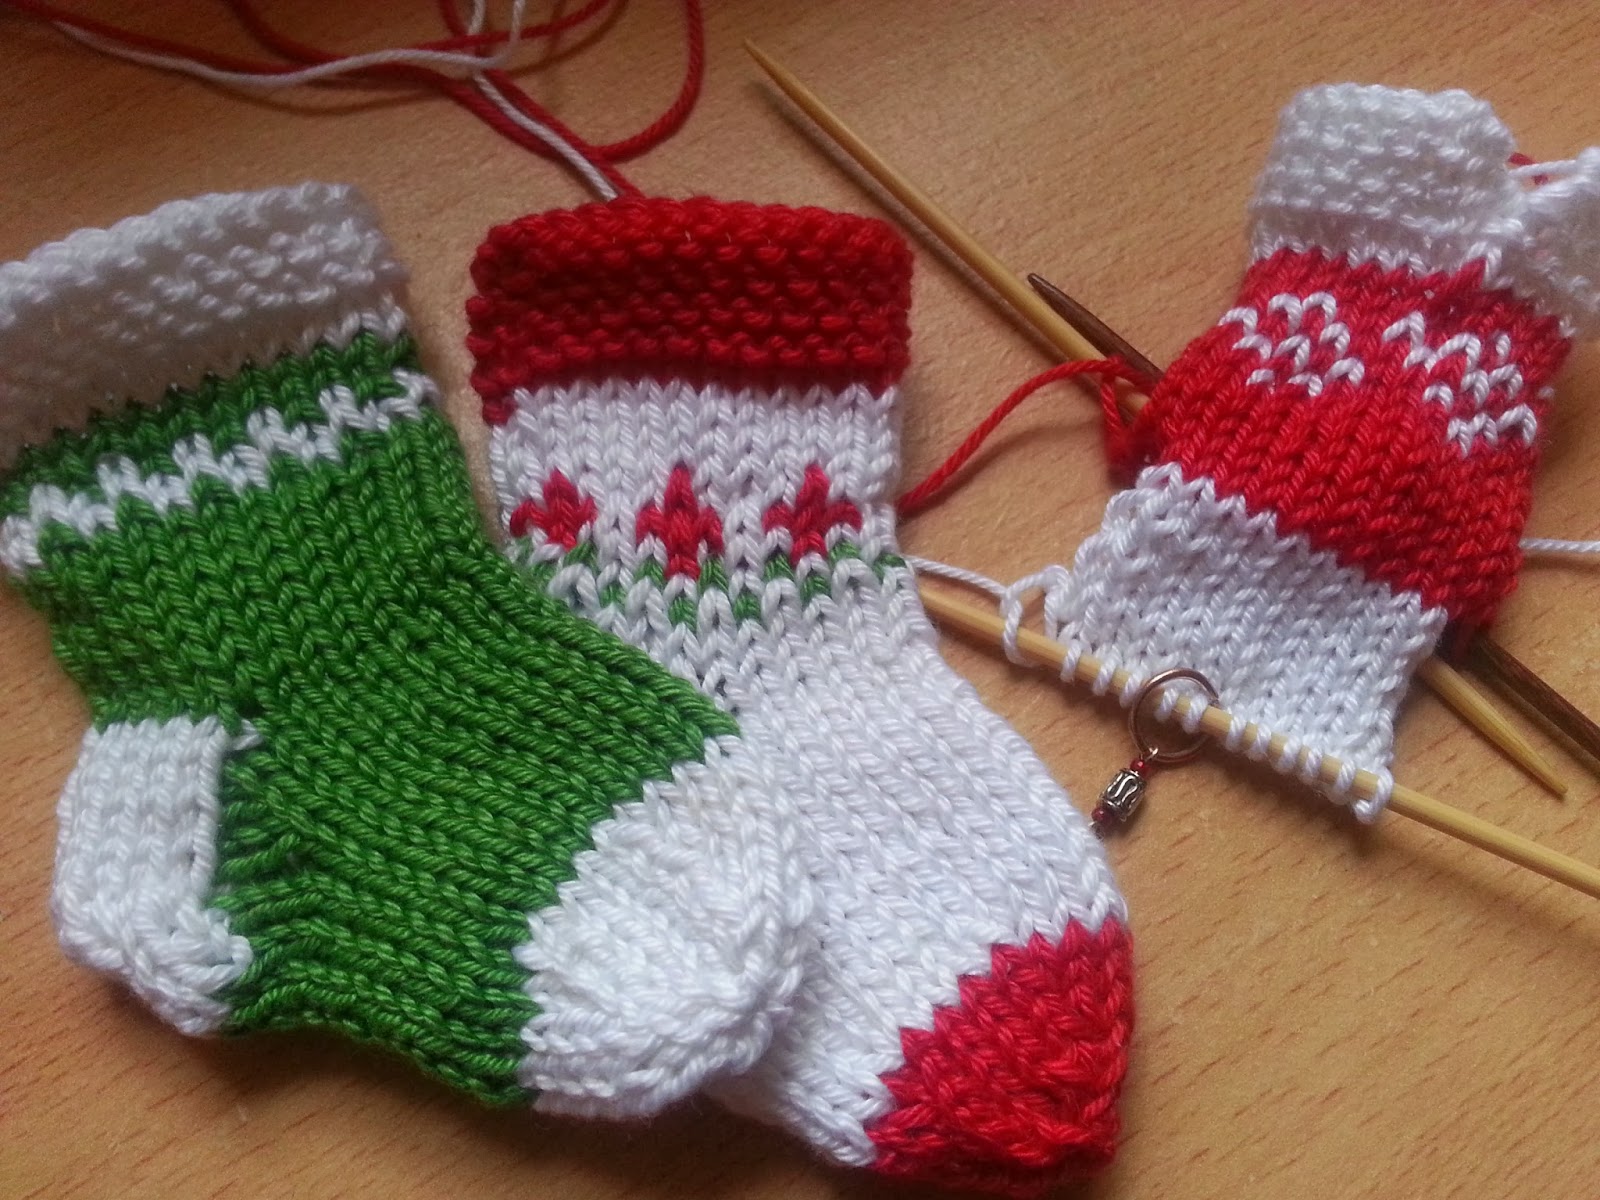 Knit Christmas mini stockings for your tree